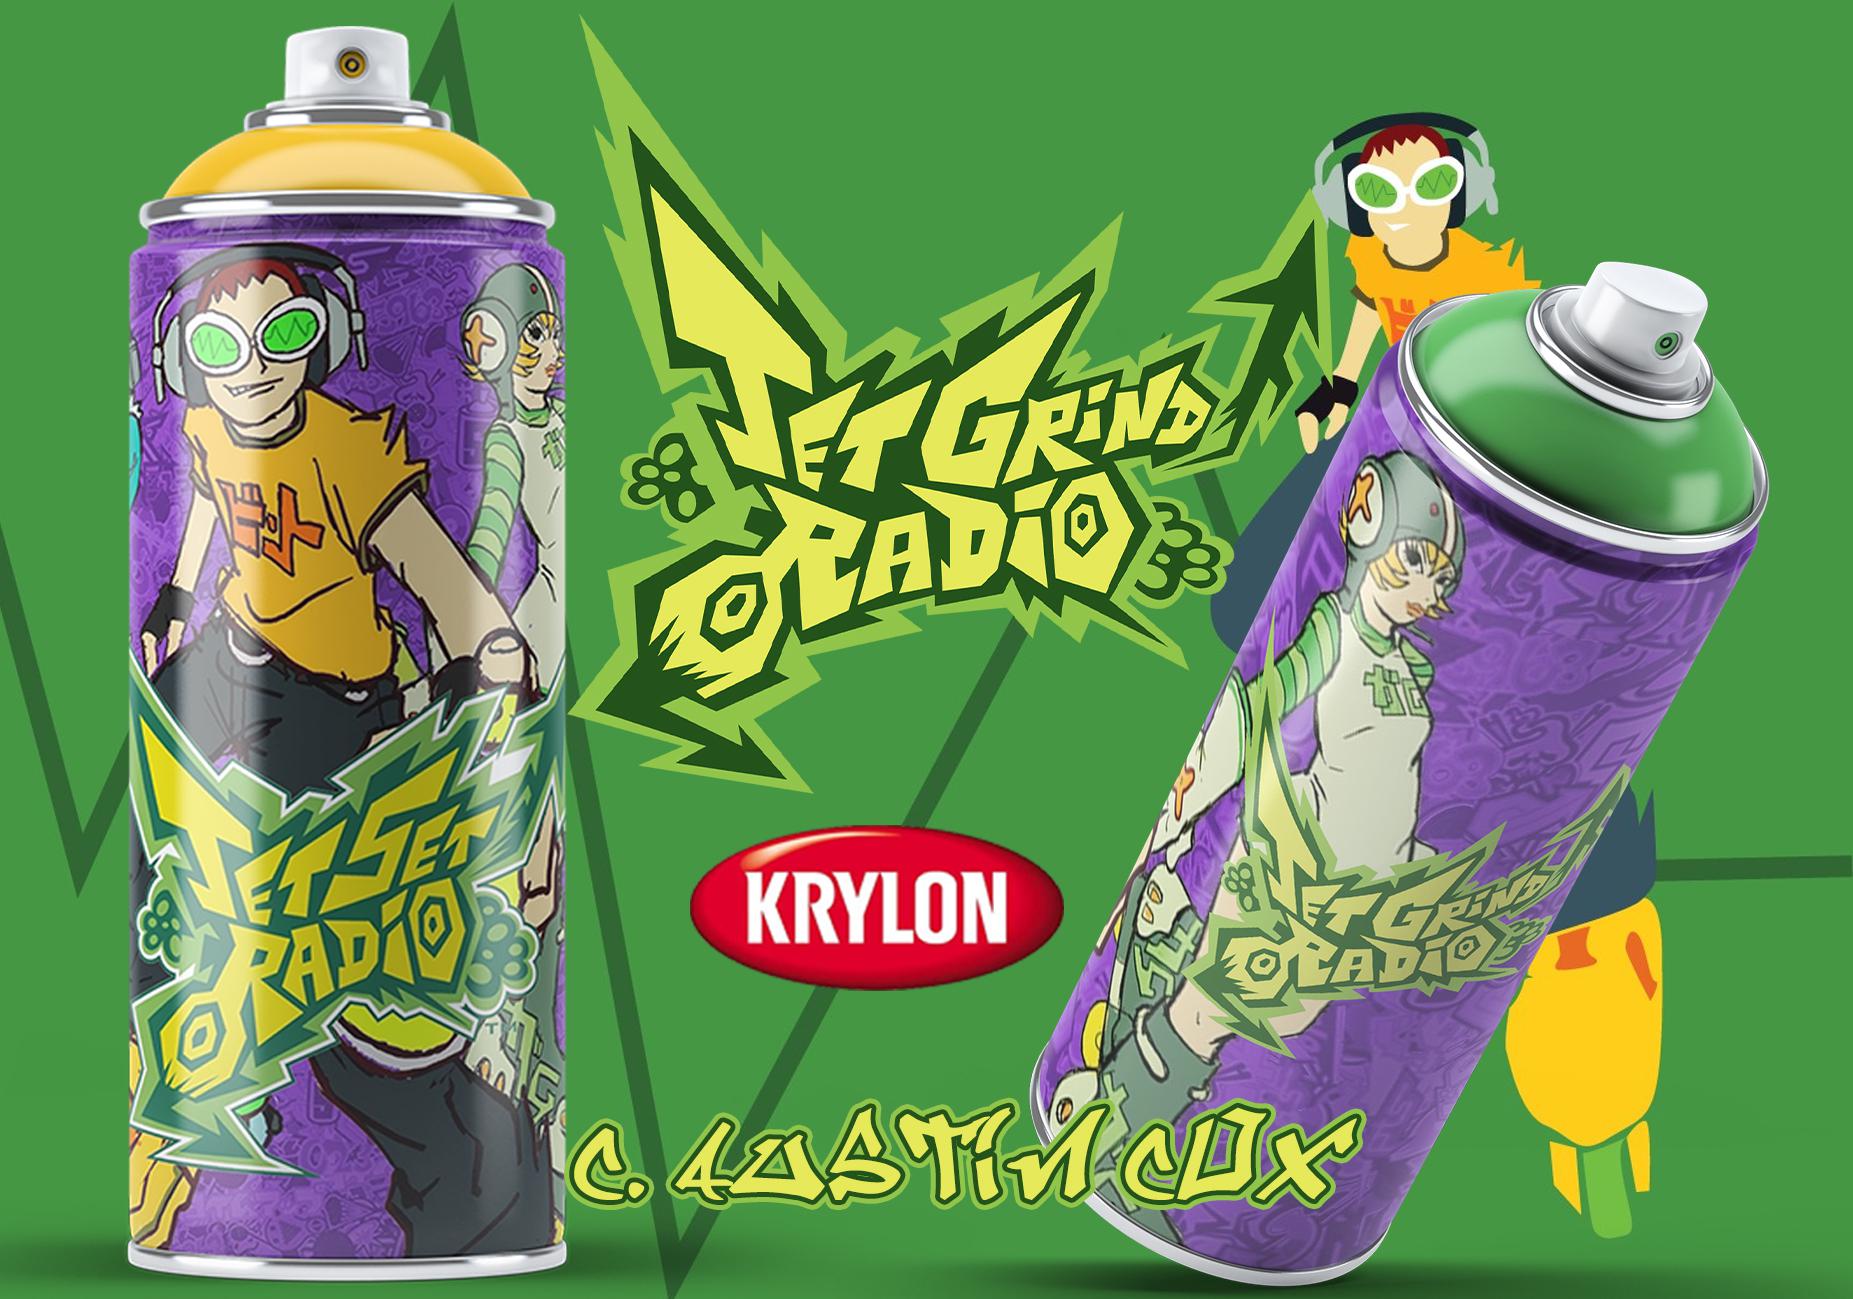 Here are those jet set radio jet grind radio spray paint cans from krylon that no one requested another wallpaper fake ad or something i got bored and wanted jgr